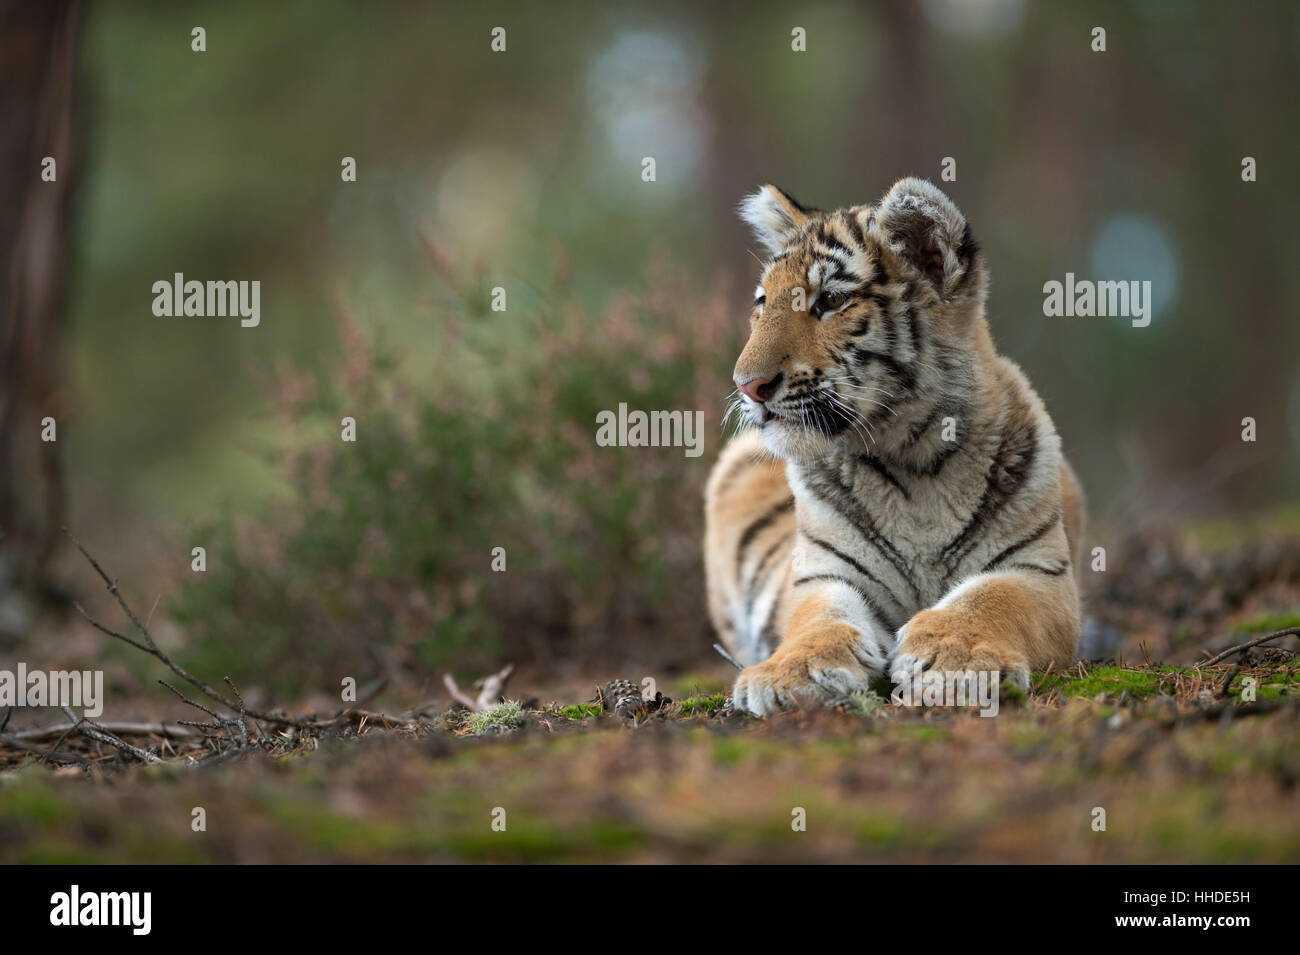 Royal Bengal Tiger / Koenigstiger ( Panthera tigris ), lying, resting on the ground of a forest, watching aside, frontal view. Stock Photo